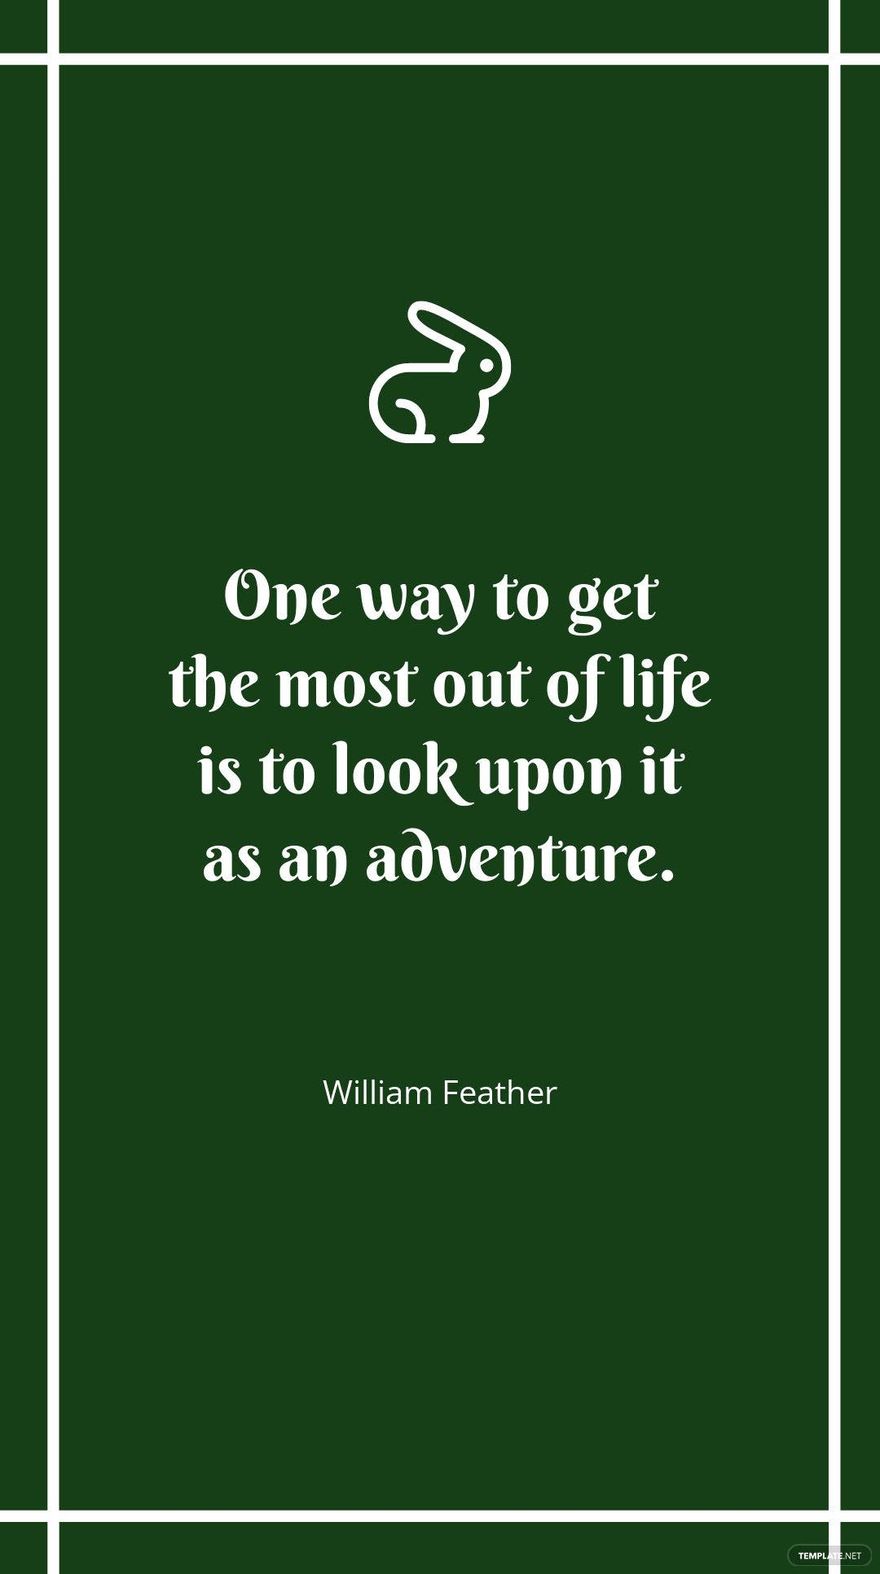 William Feather - One way to get the most out of life is to look upon it as an adventure.